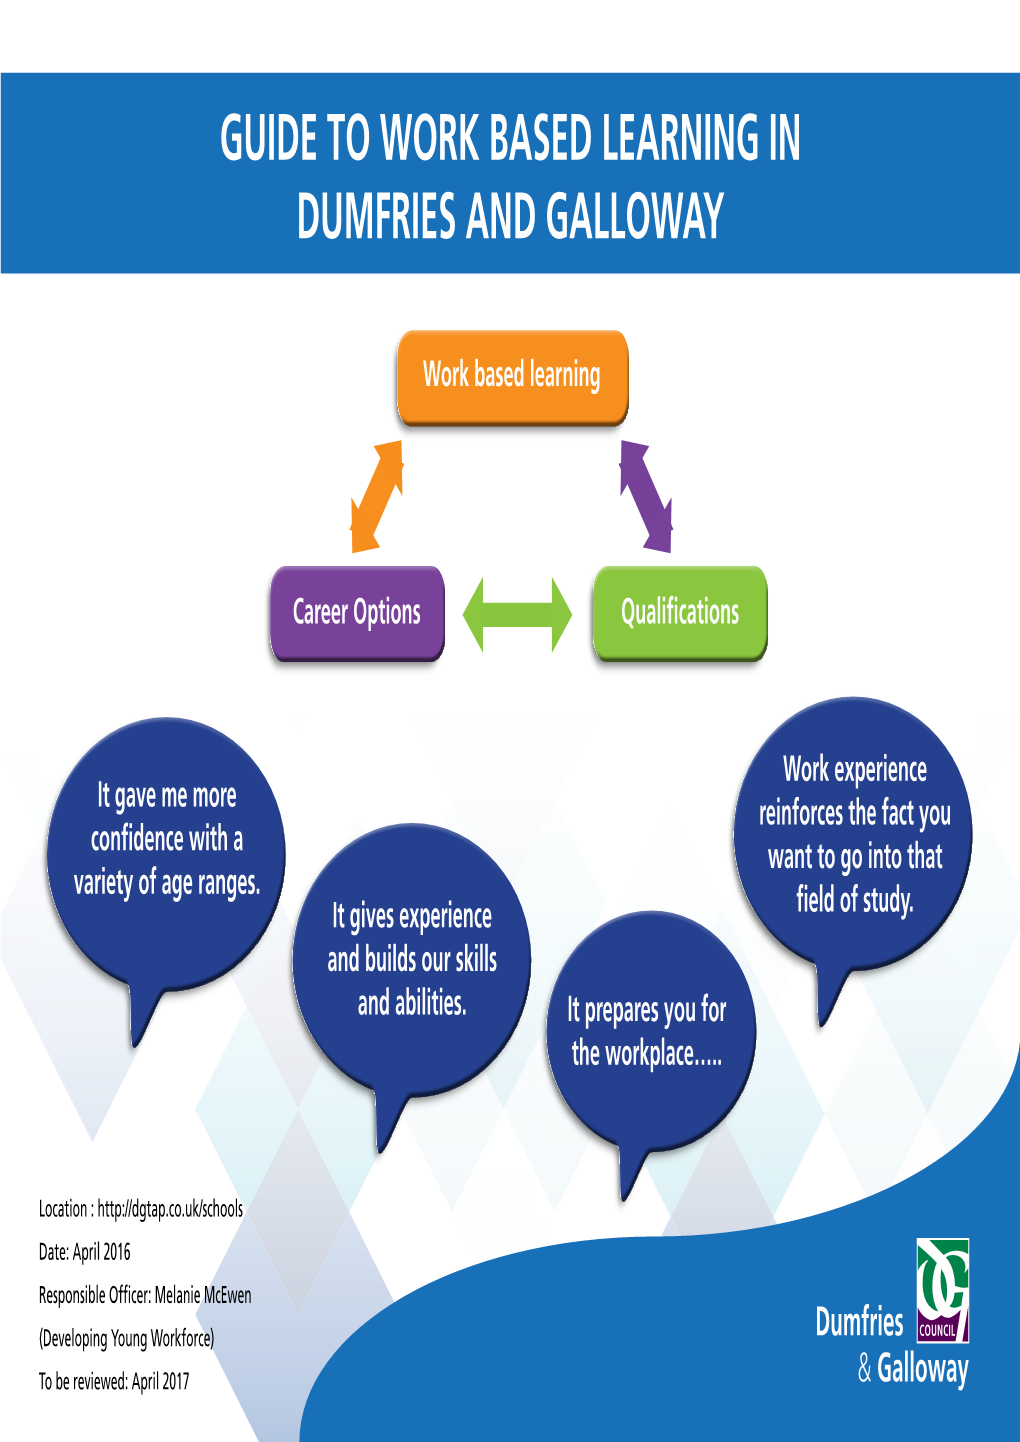 Guide to Work Based Learning in Dumfries and Galloway